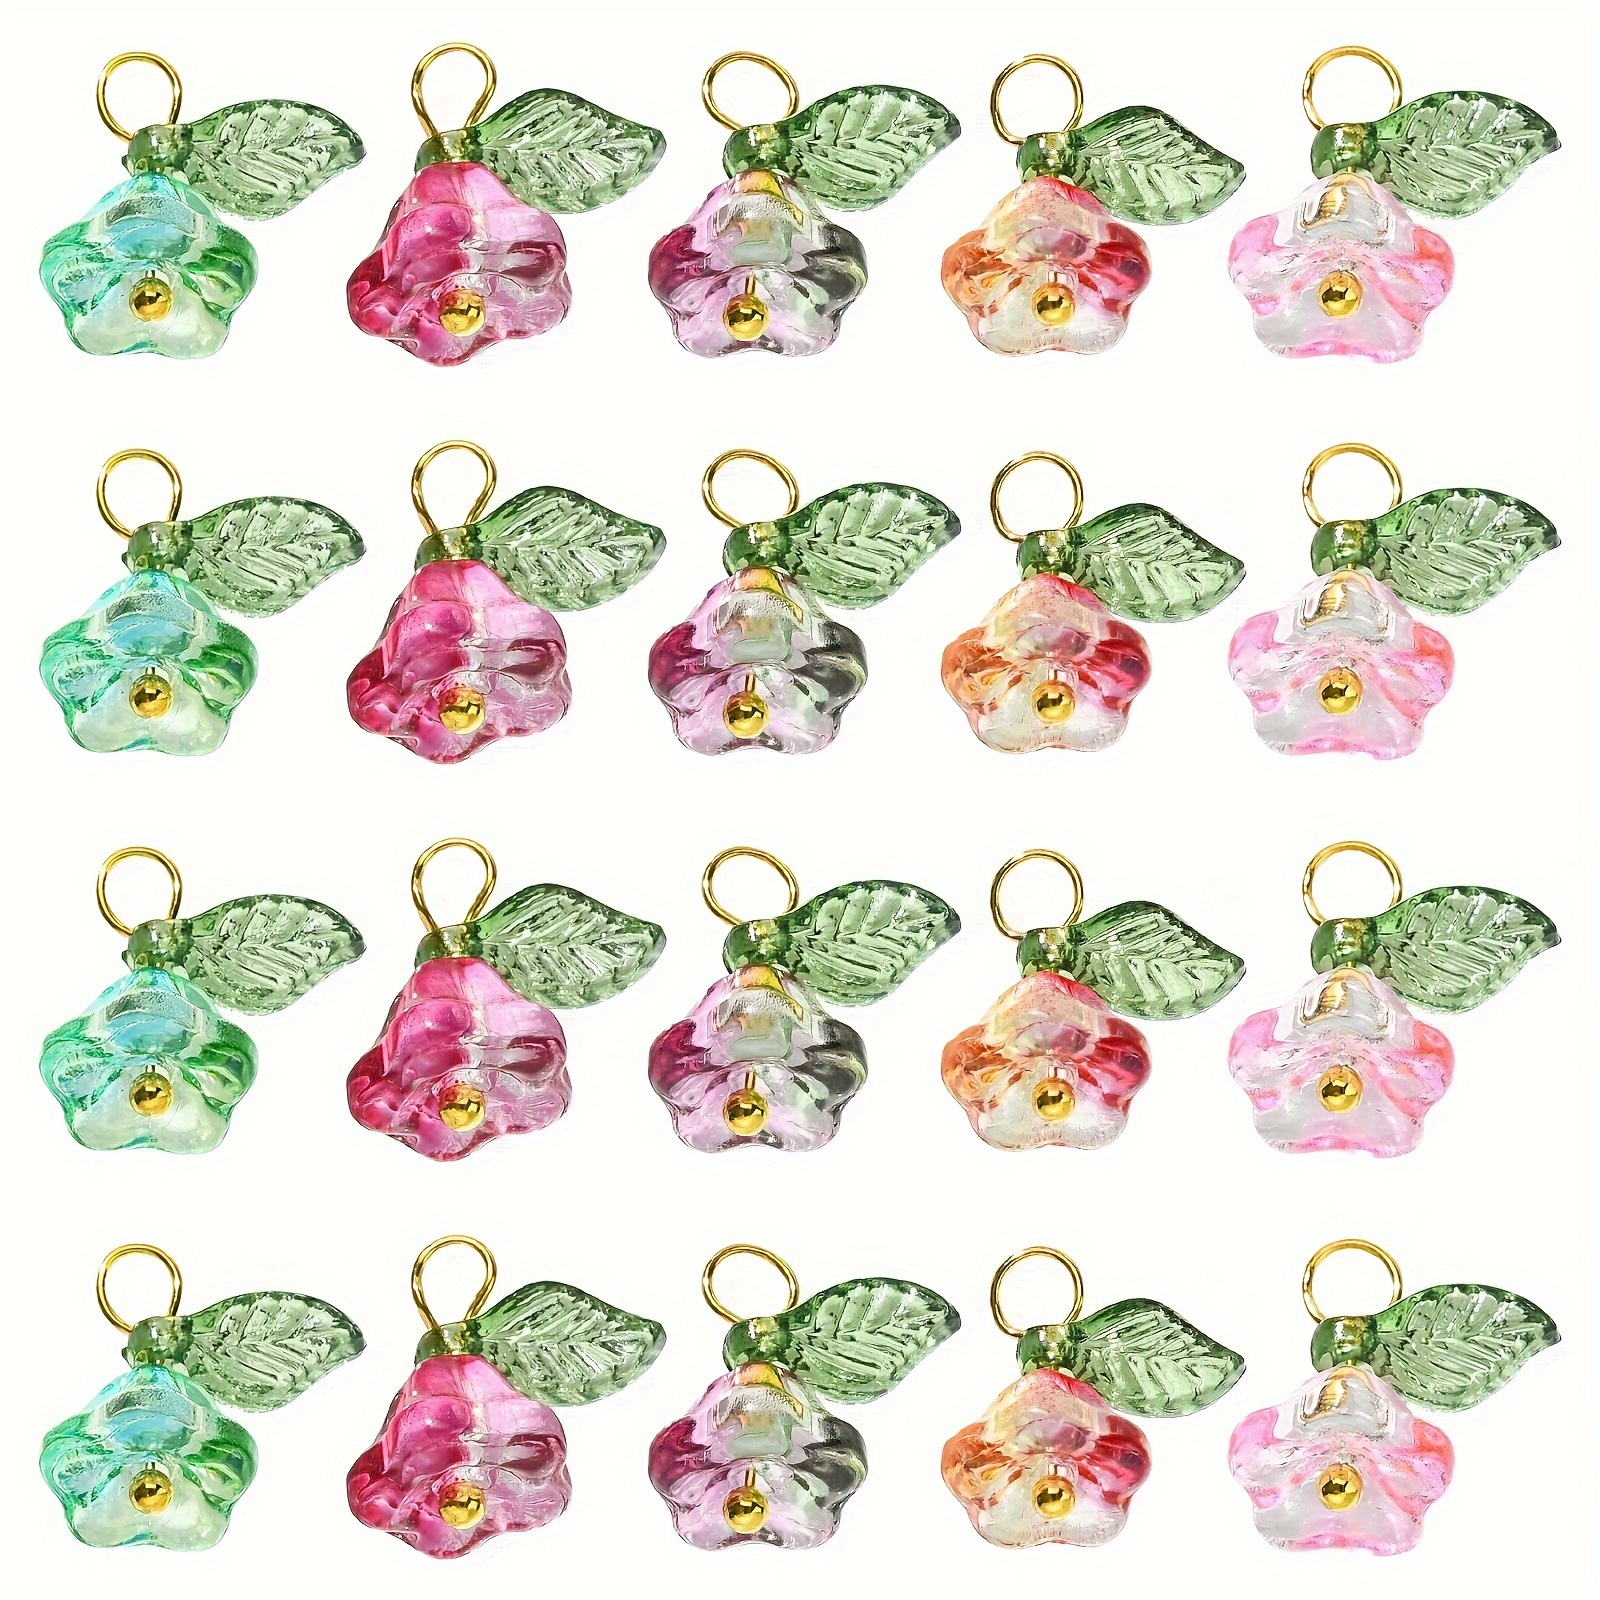 

50pcs 5 Colors Glass Trumpet Flower Pendants Spring Elegant Floral With Leaf Charms For Diy Necklace Bracelet Earrings Jewelry Making Accessories Keychain